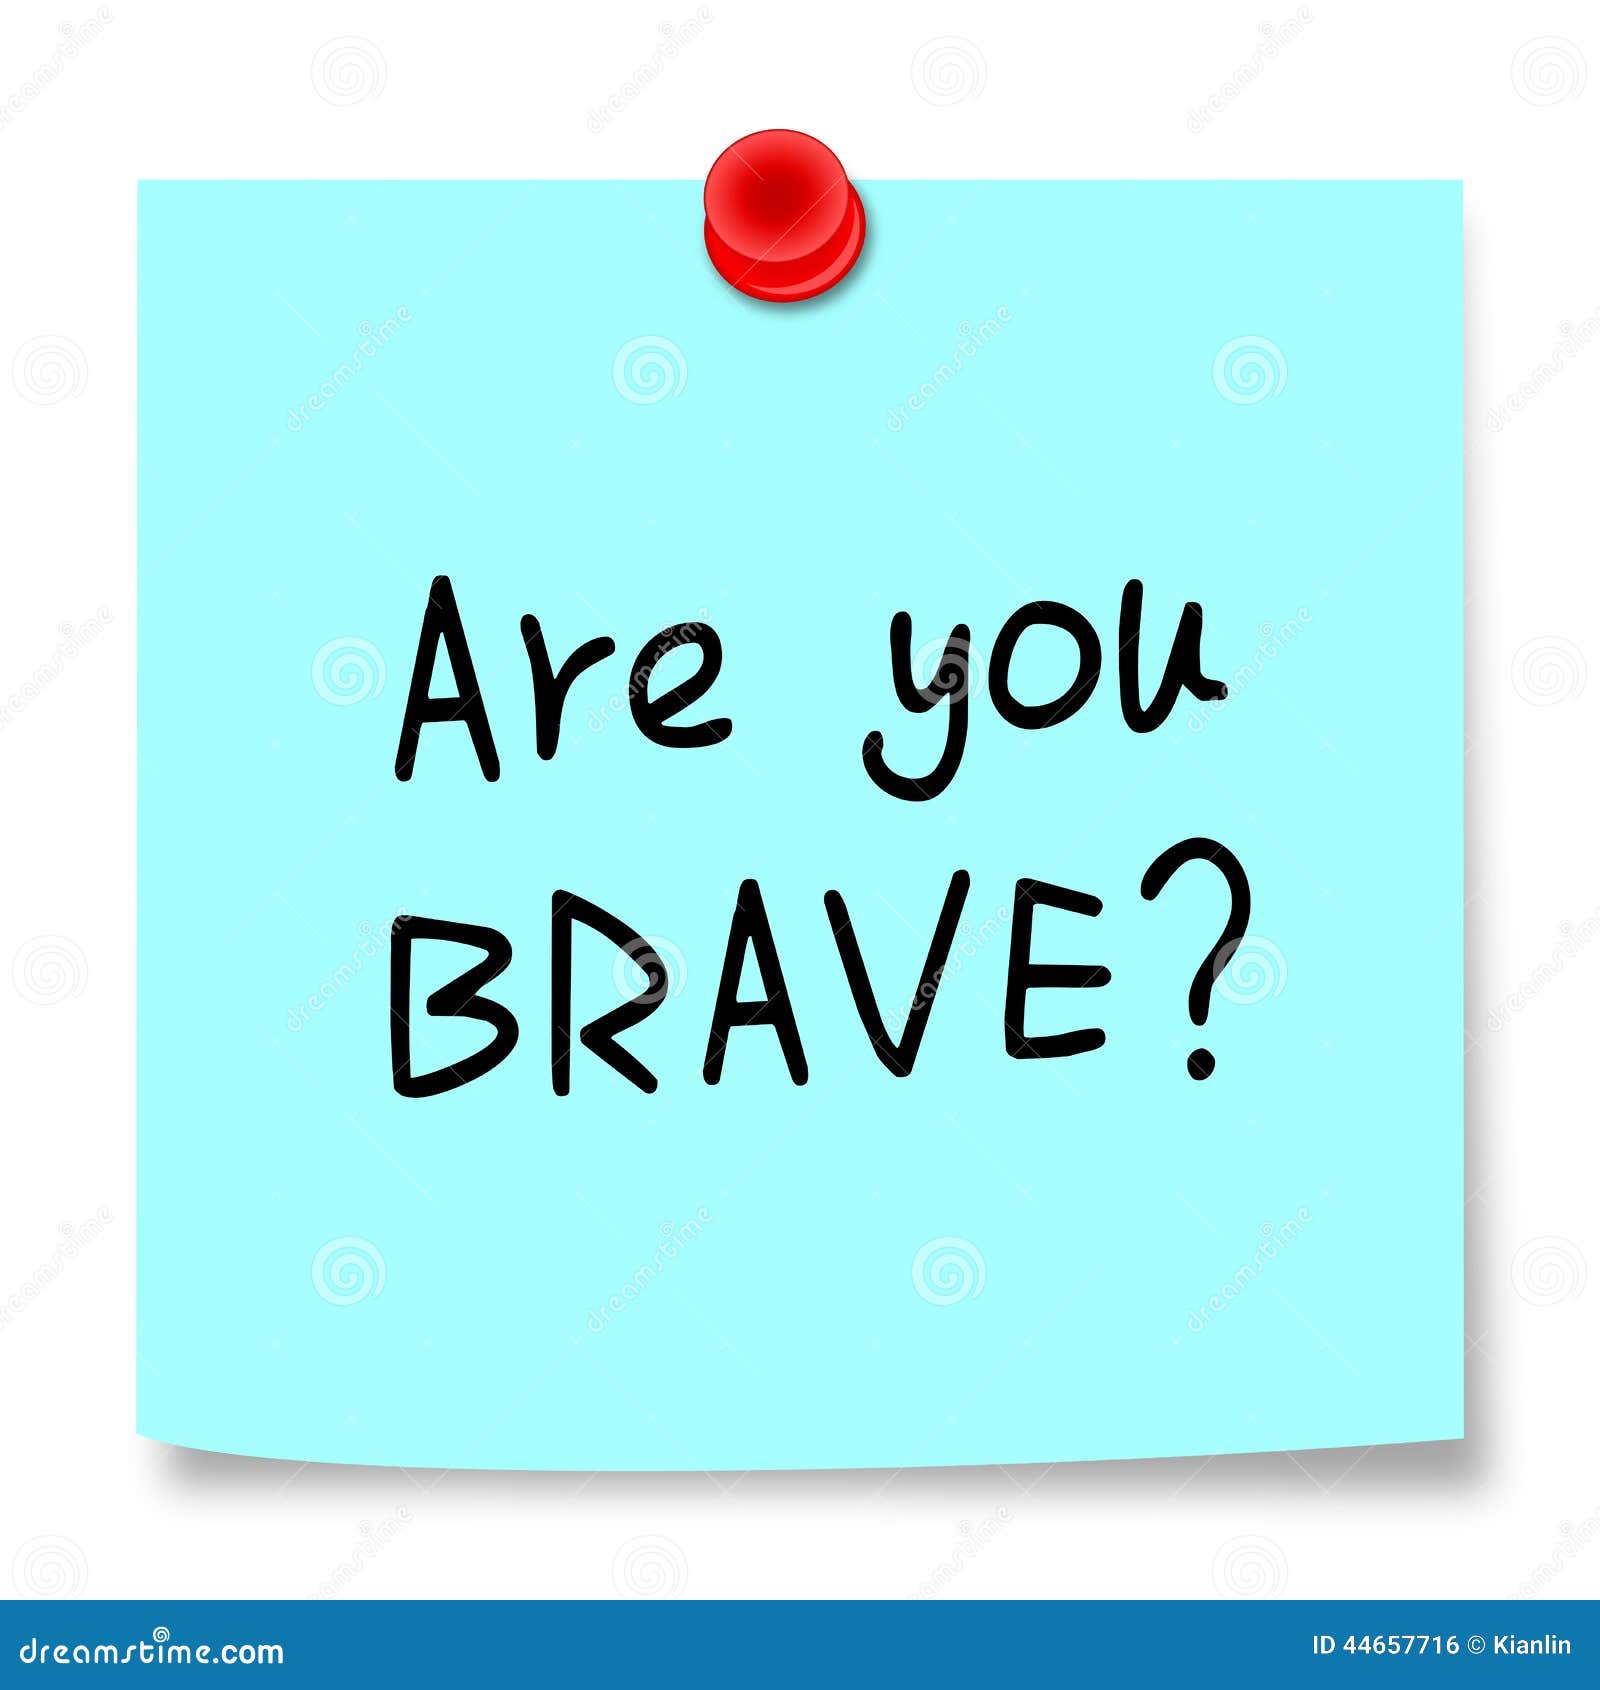 are you brave?